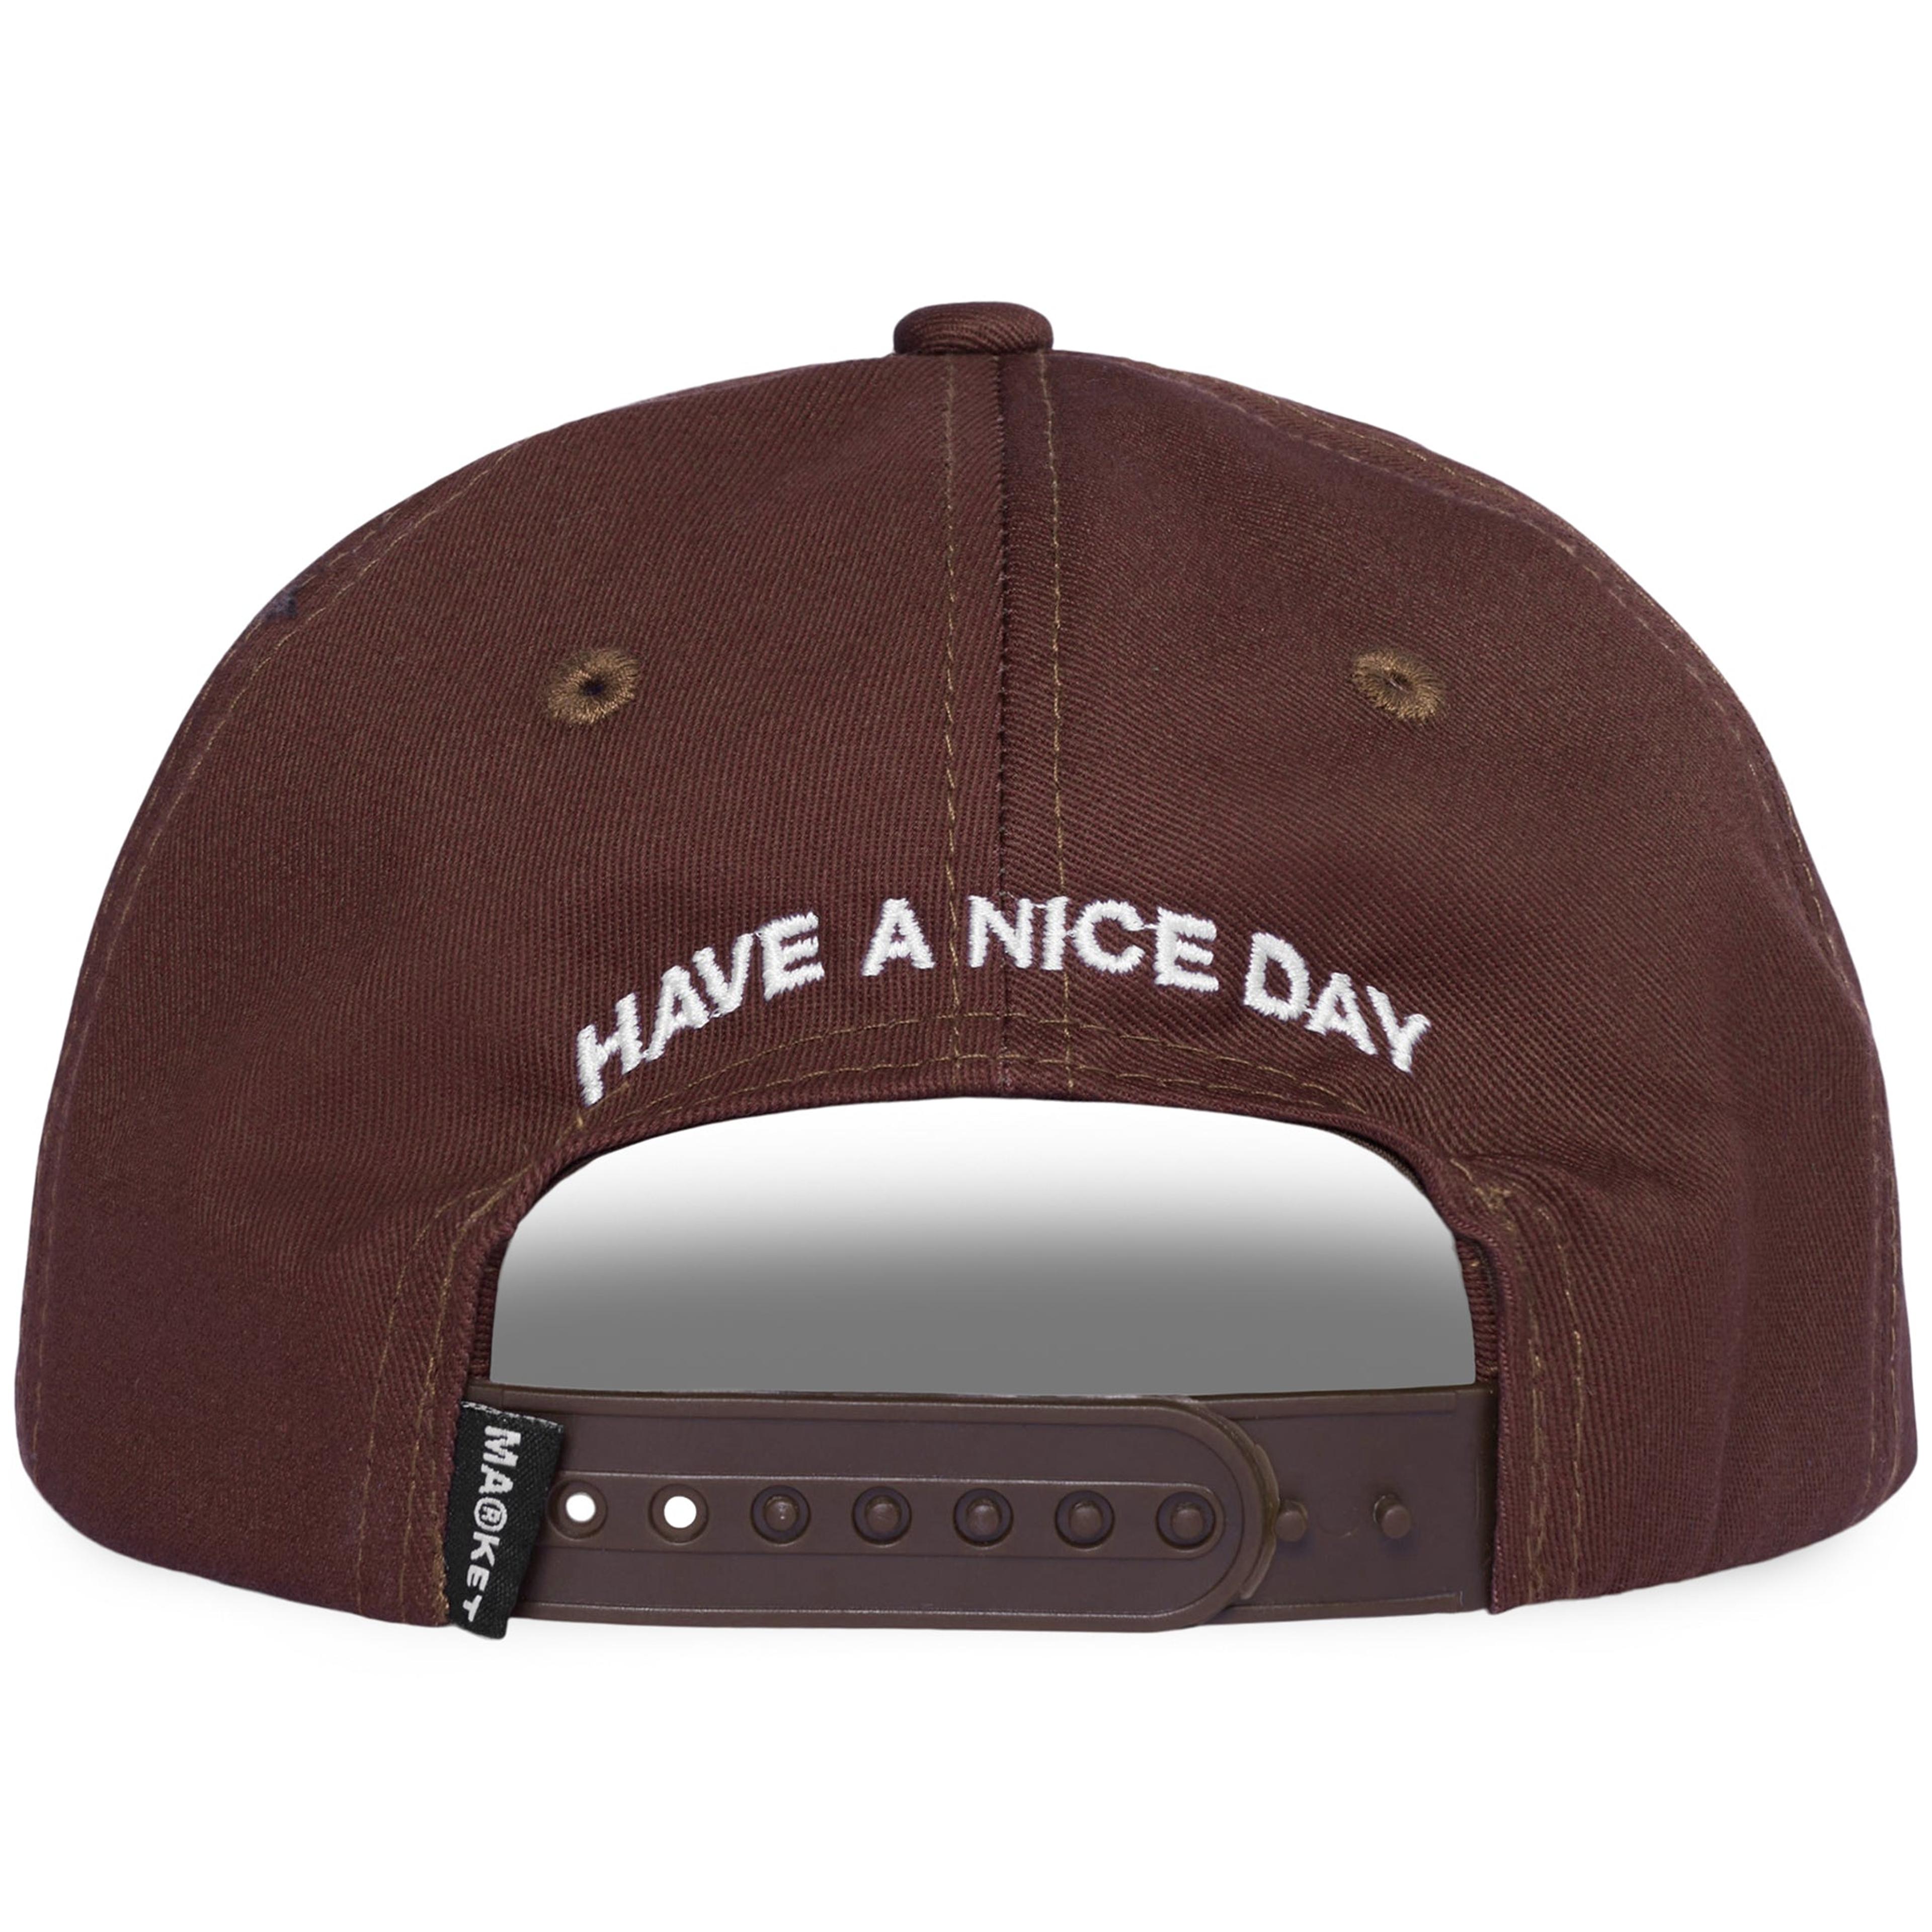 Alternate View 1 of SMILEY HATERS 5-PANEL HAT